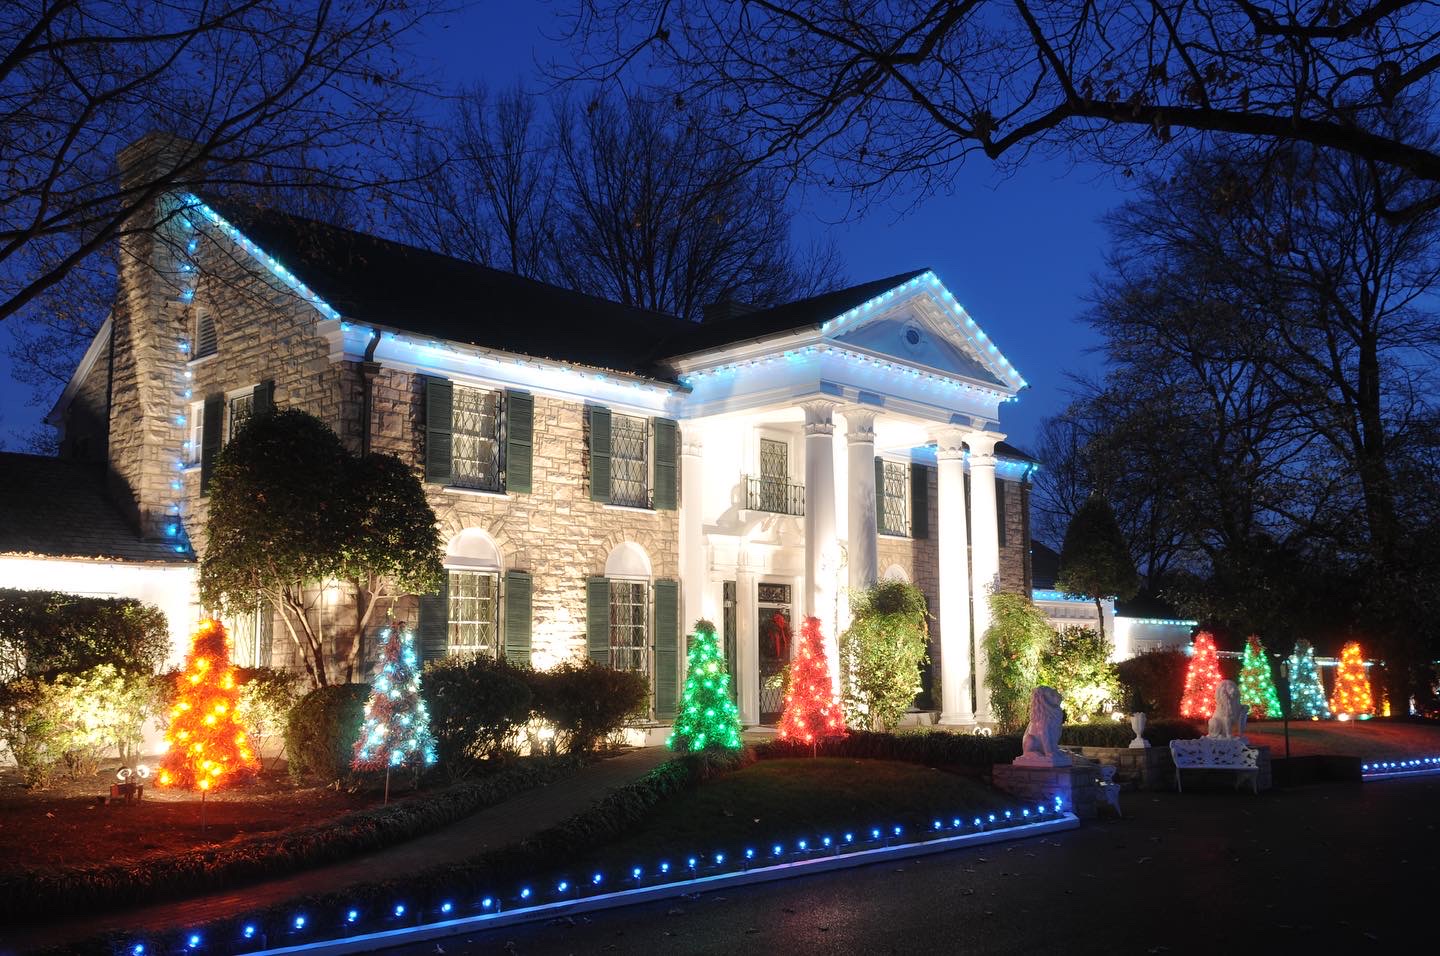 graceland decorated for christmas in memphis in winter